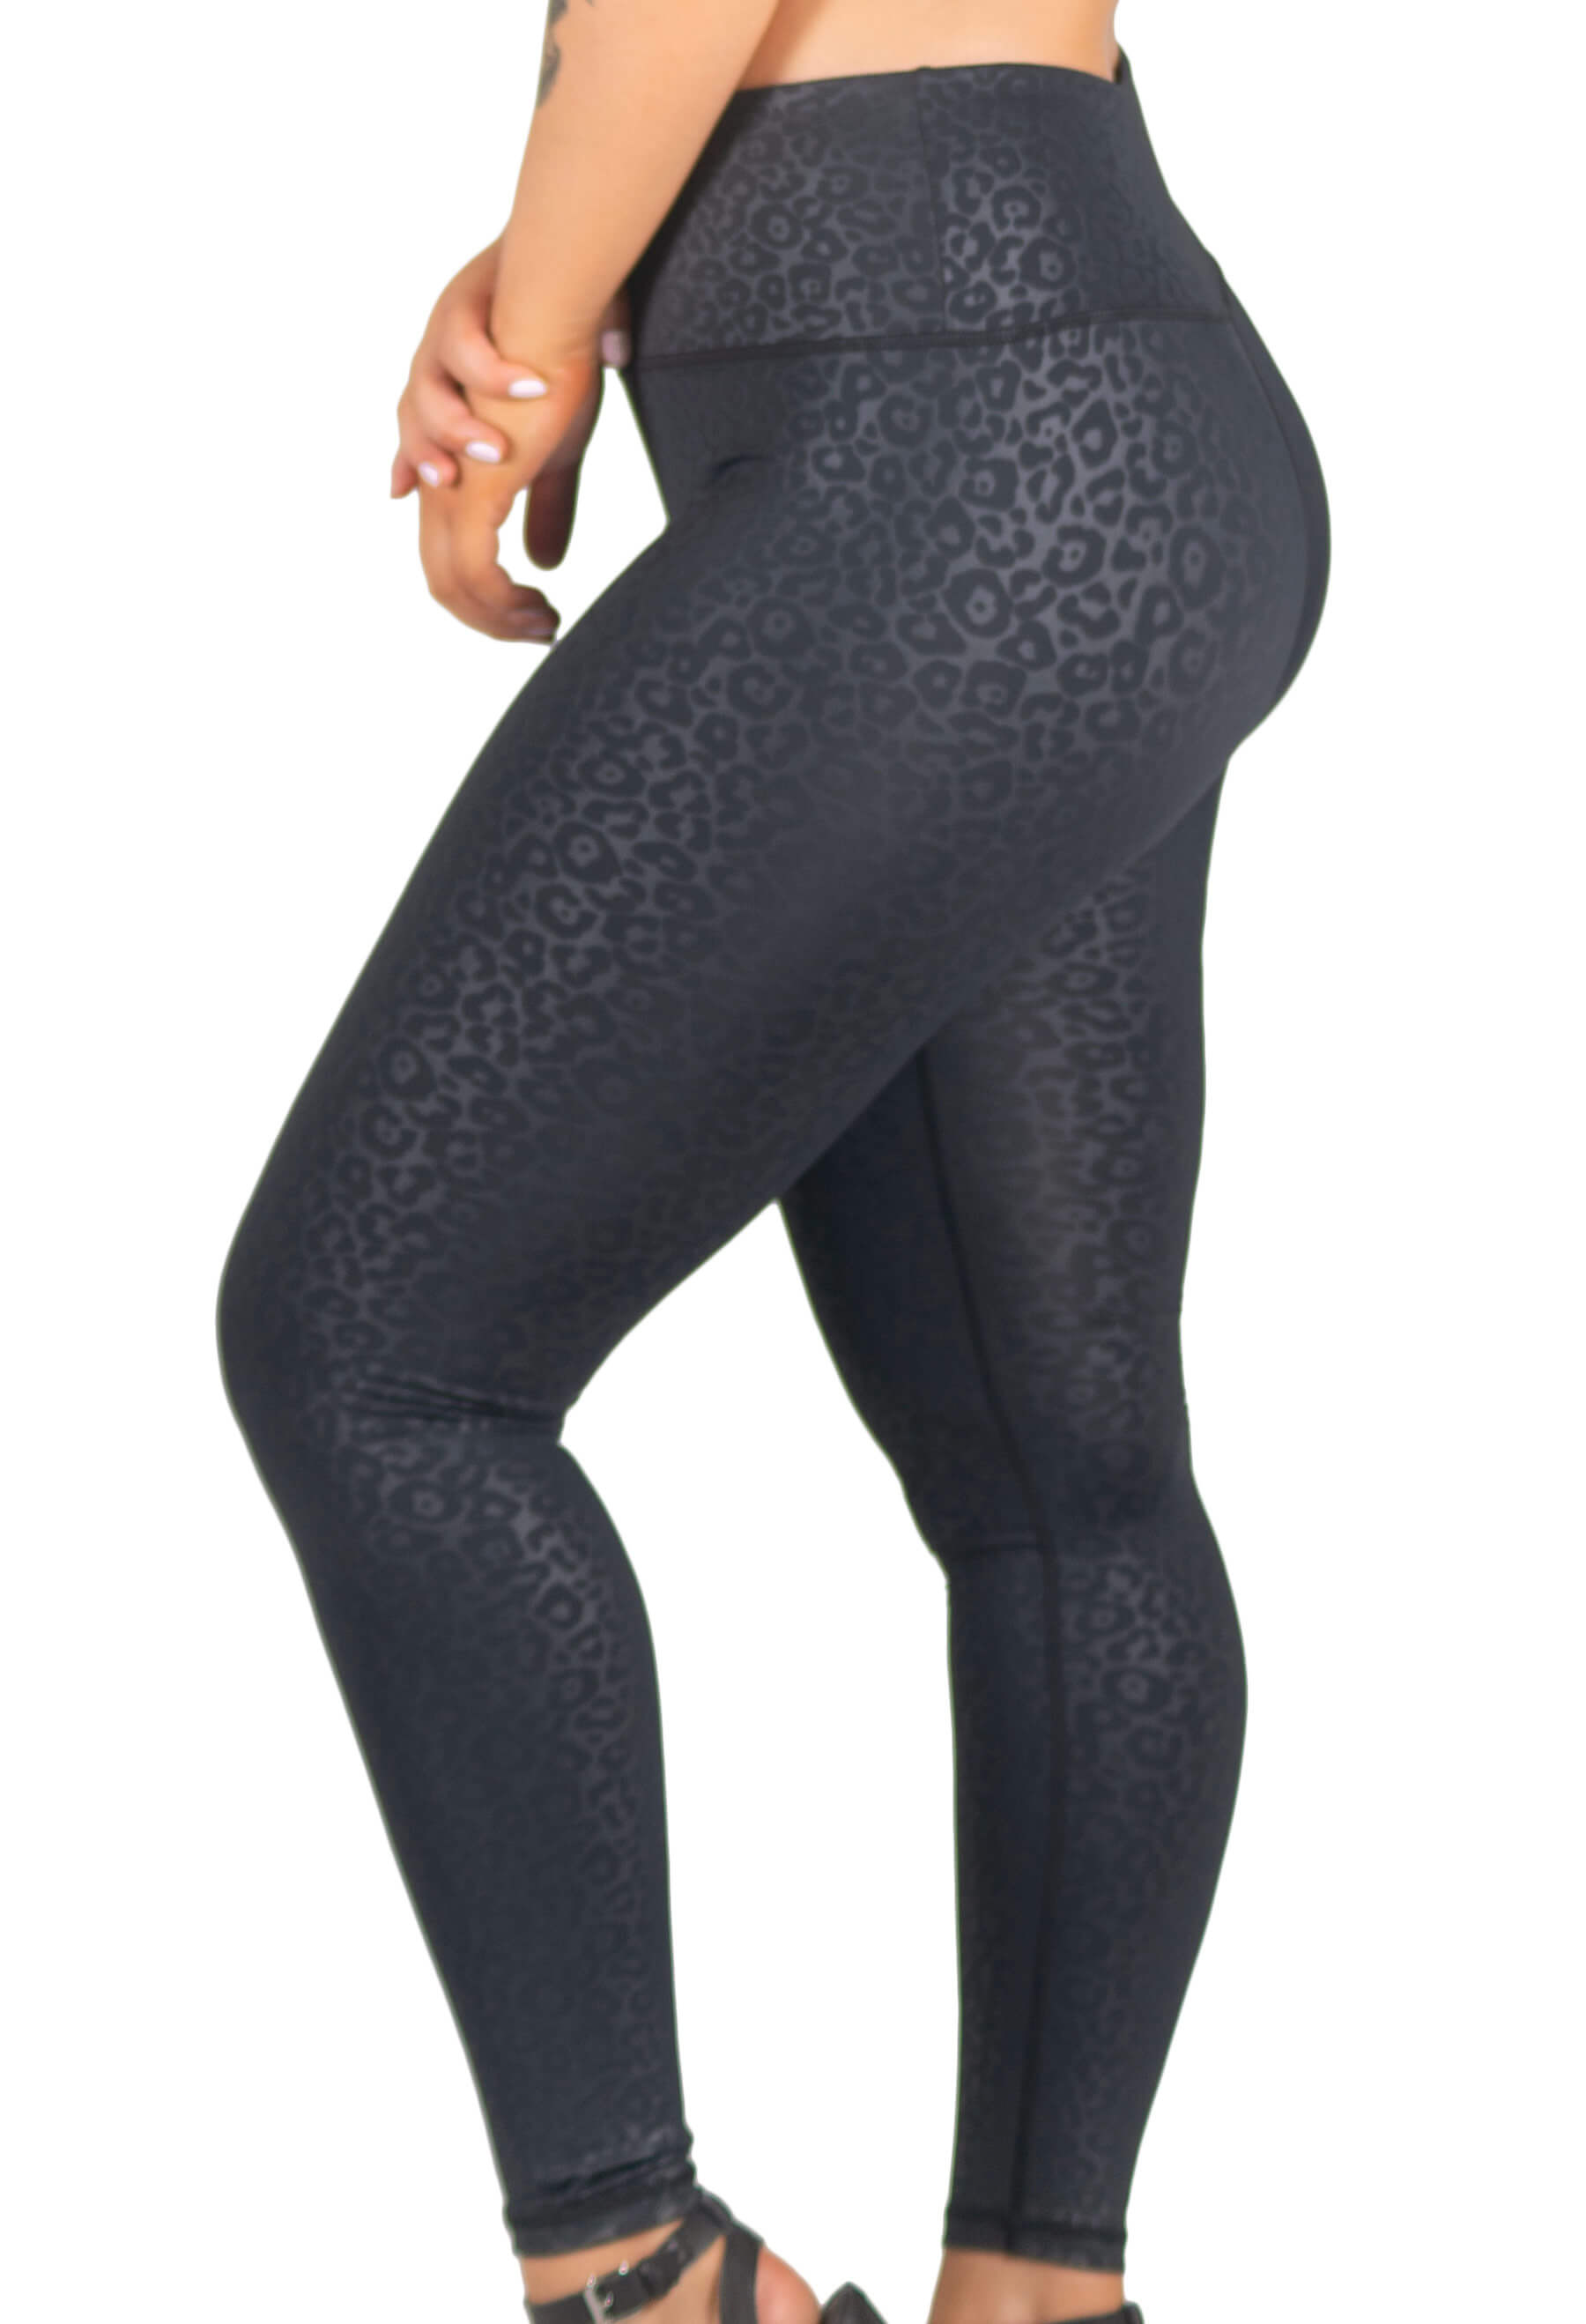 Workout leggings - Black and leopard print - Shaping performance